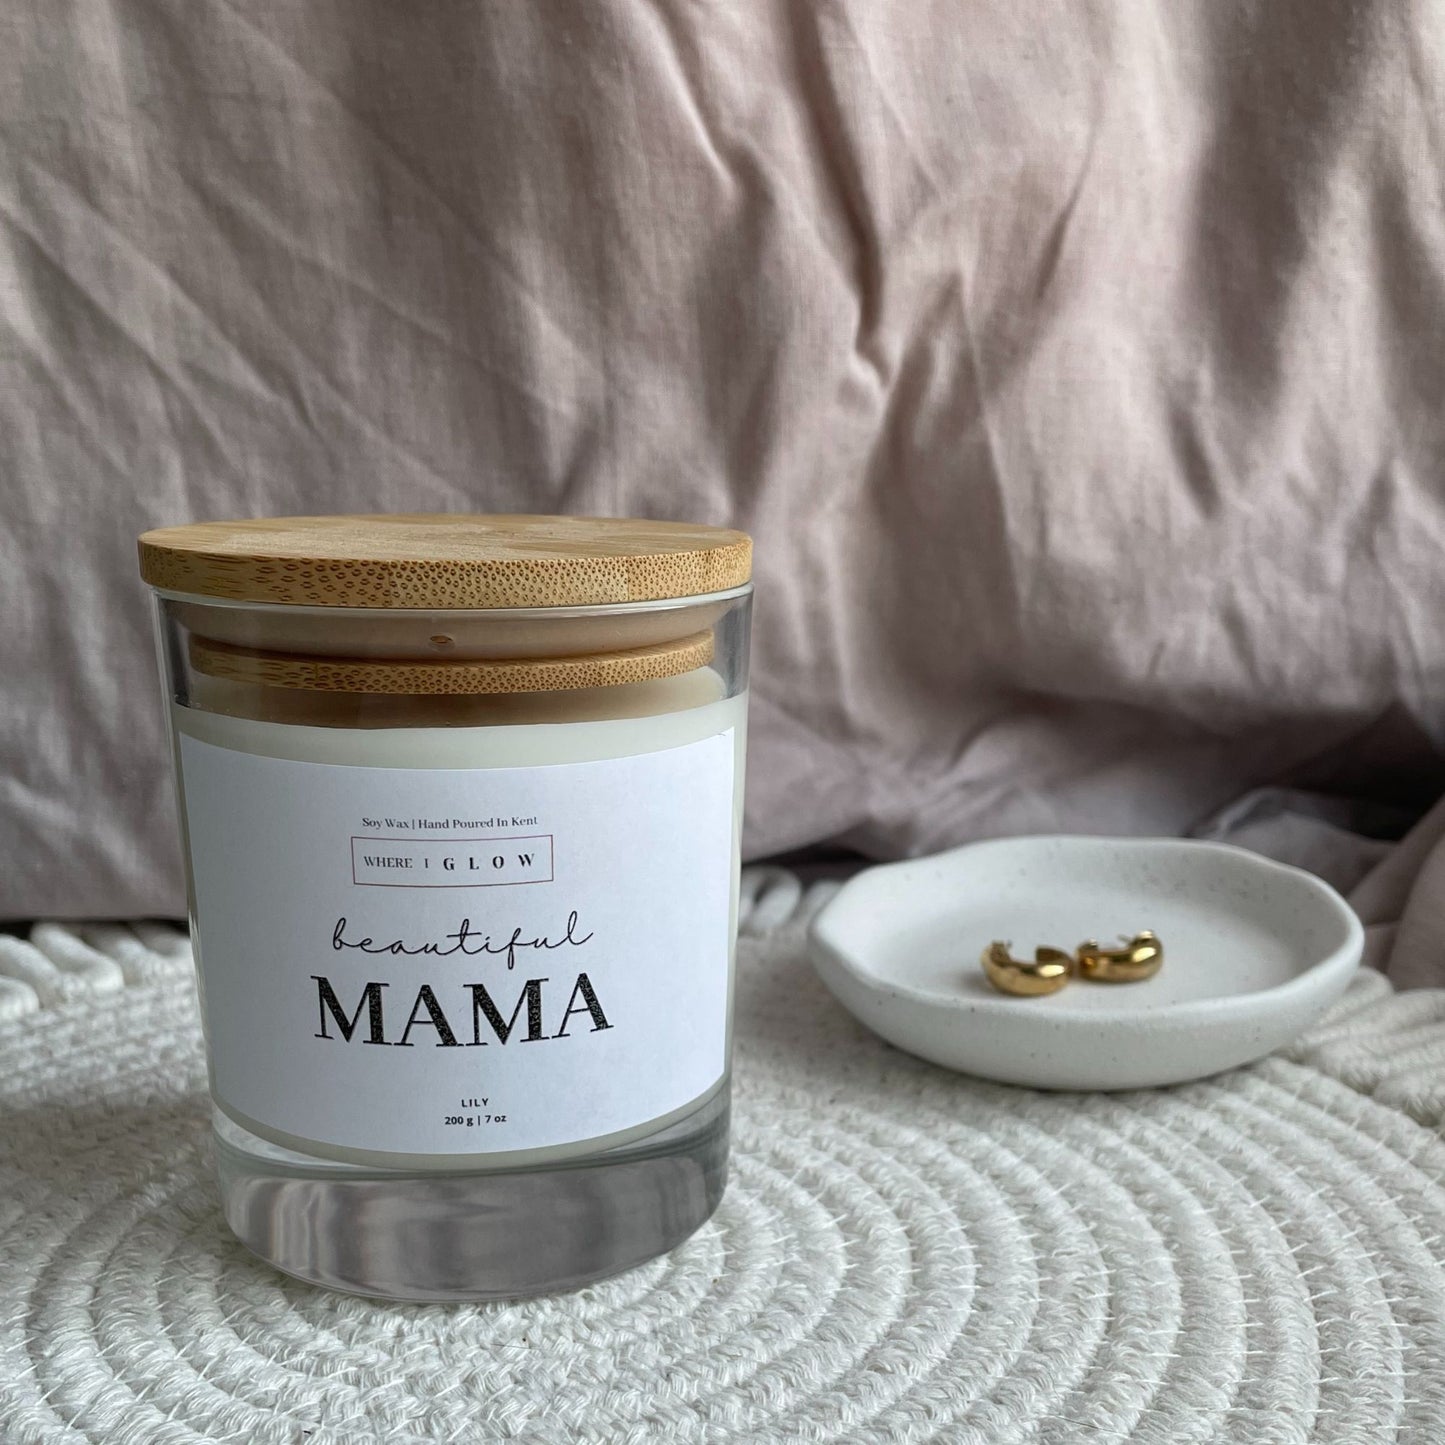 Vegan Mama Candle Scented Soy Candle Gift by Where I Glow